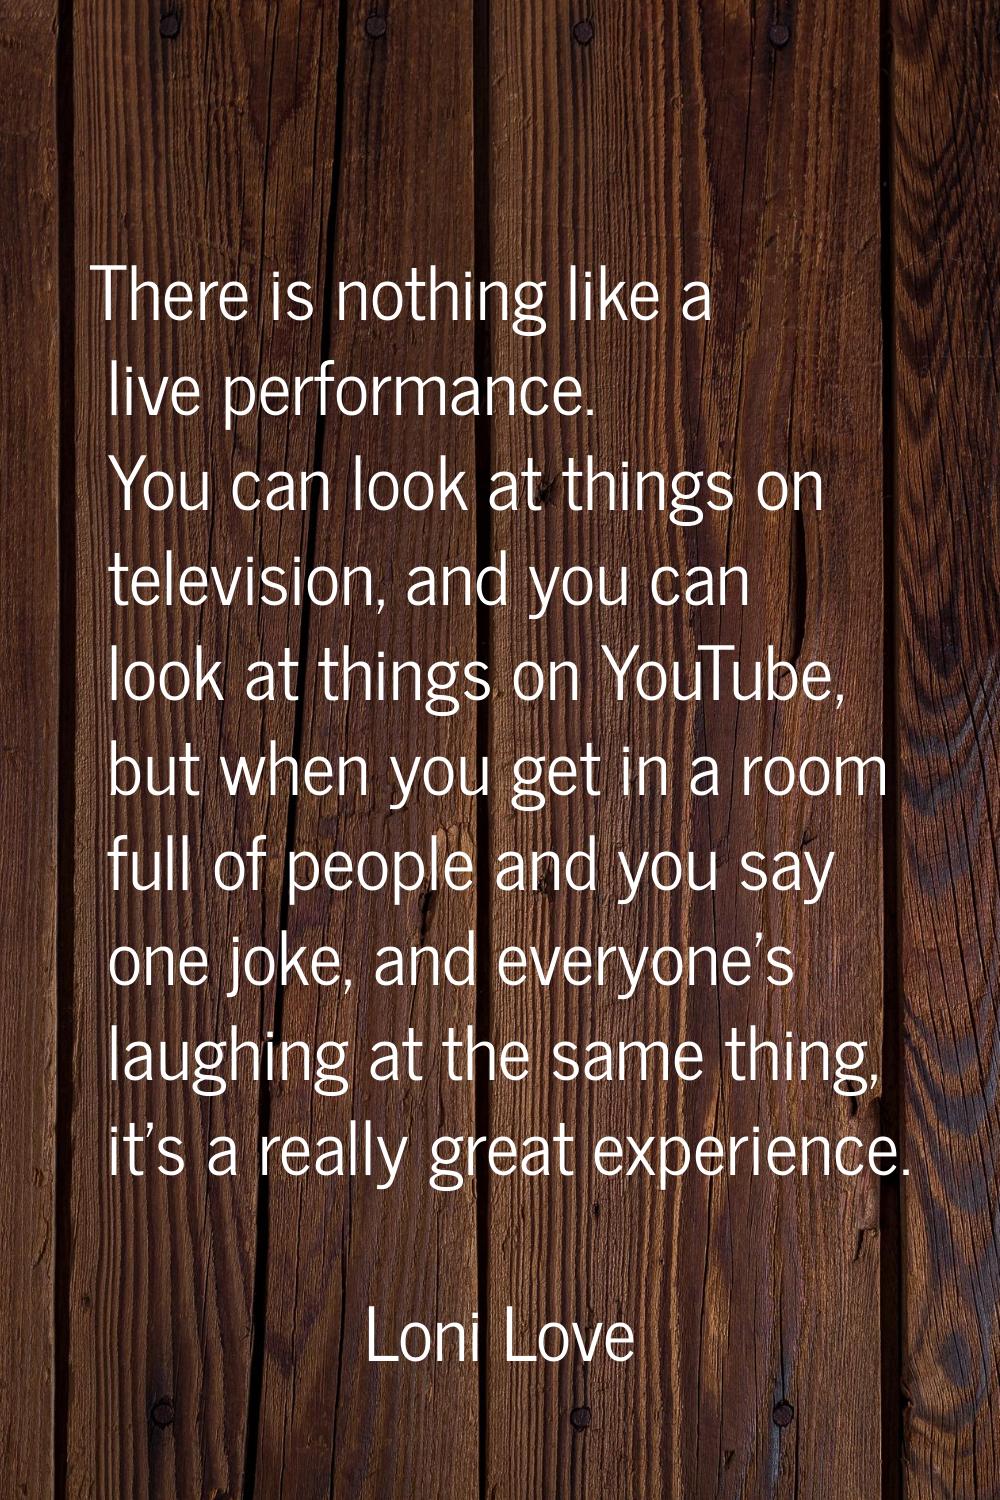 There is nothing like a live performance. You can look at things on television, and you can look at